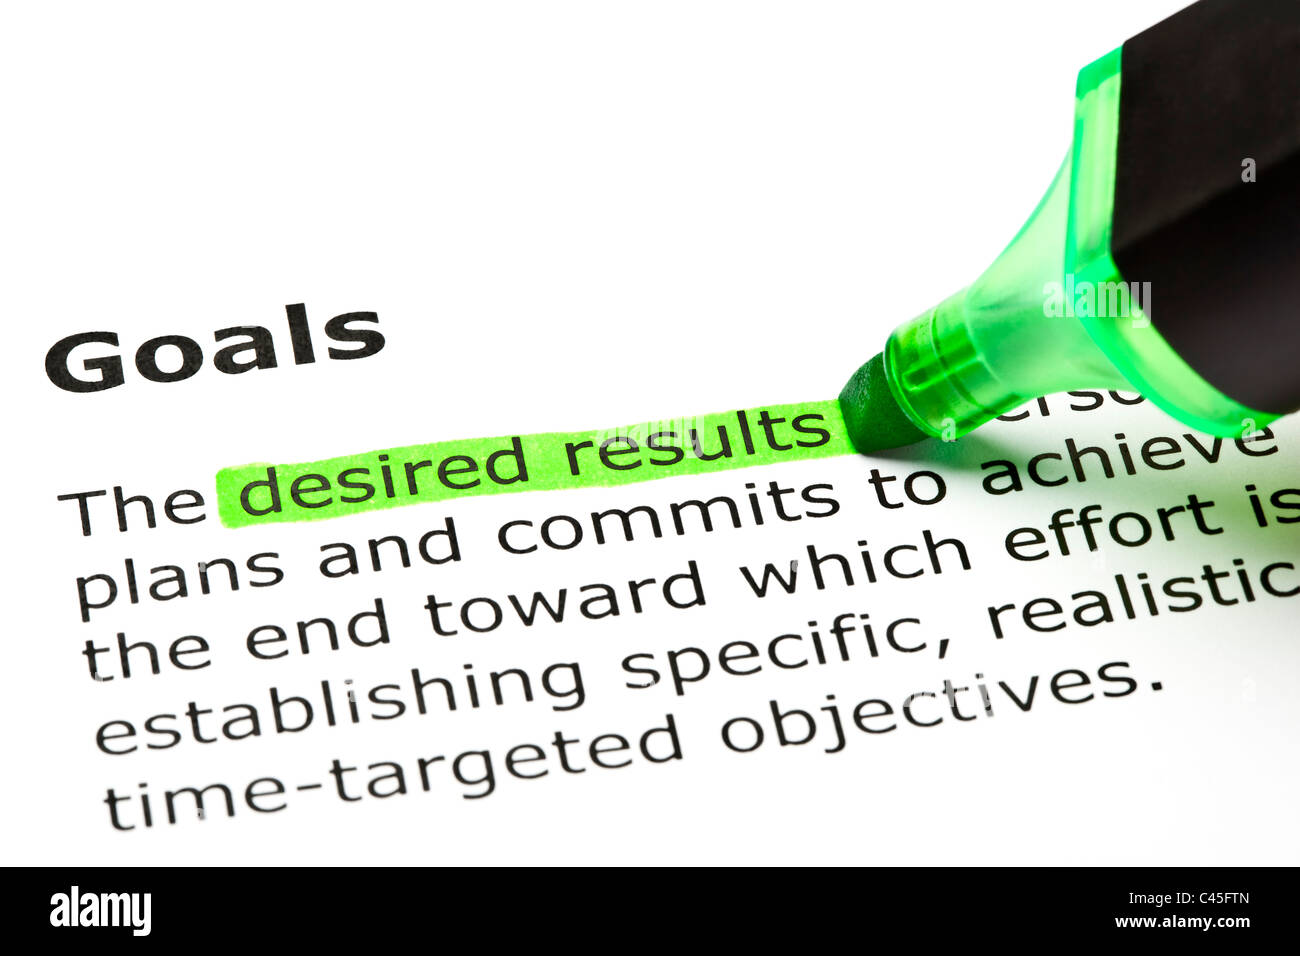 'Desired results' highlighted in green, under the heading 'Goals' Stock Photo